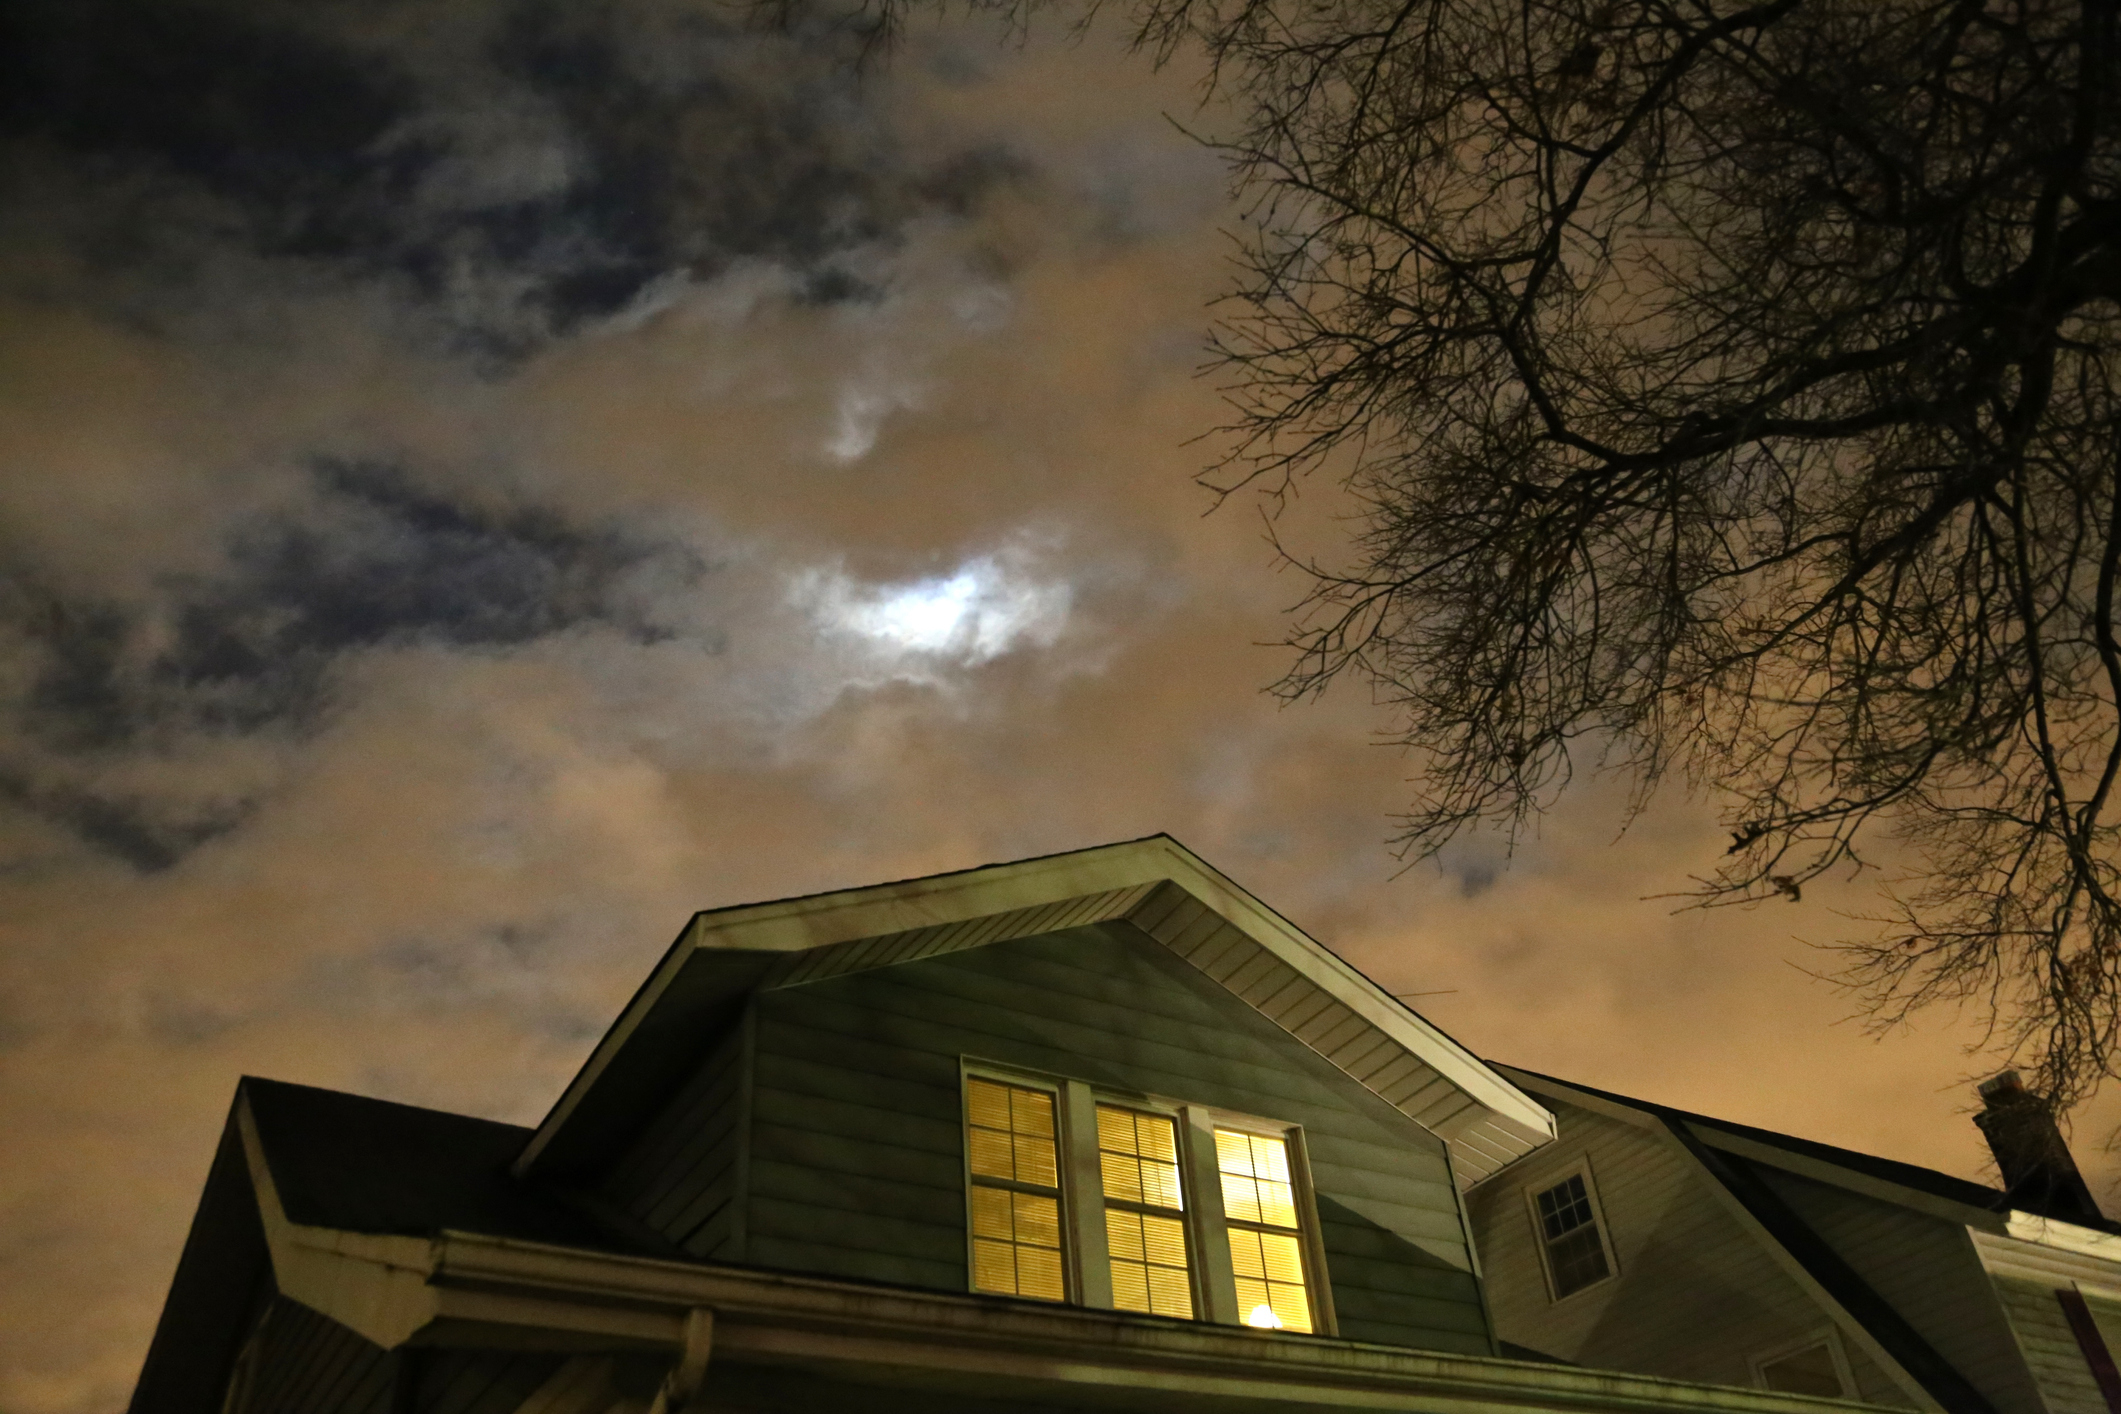 Night sky with clouds partially covering the moon above a house with lit windows